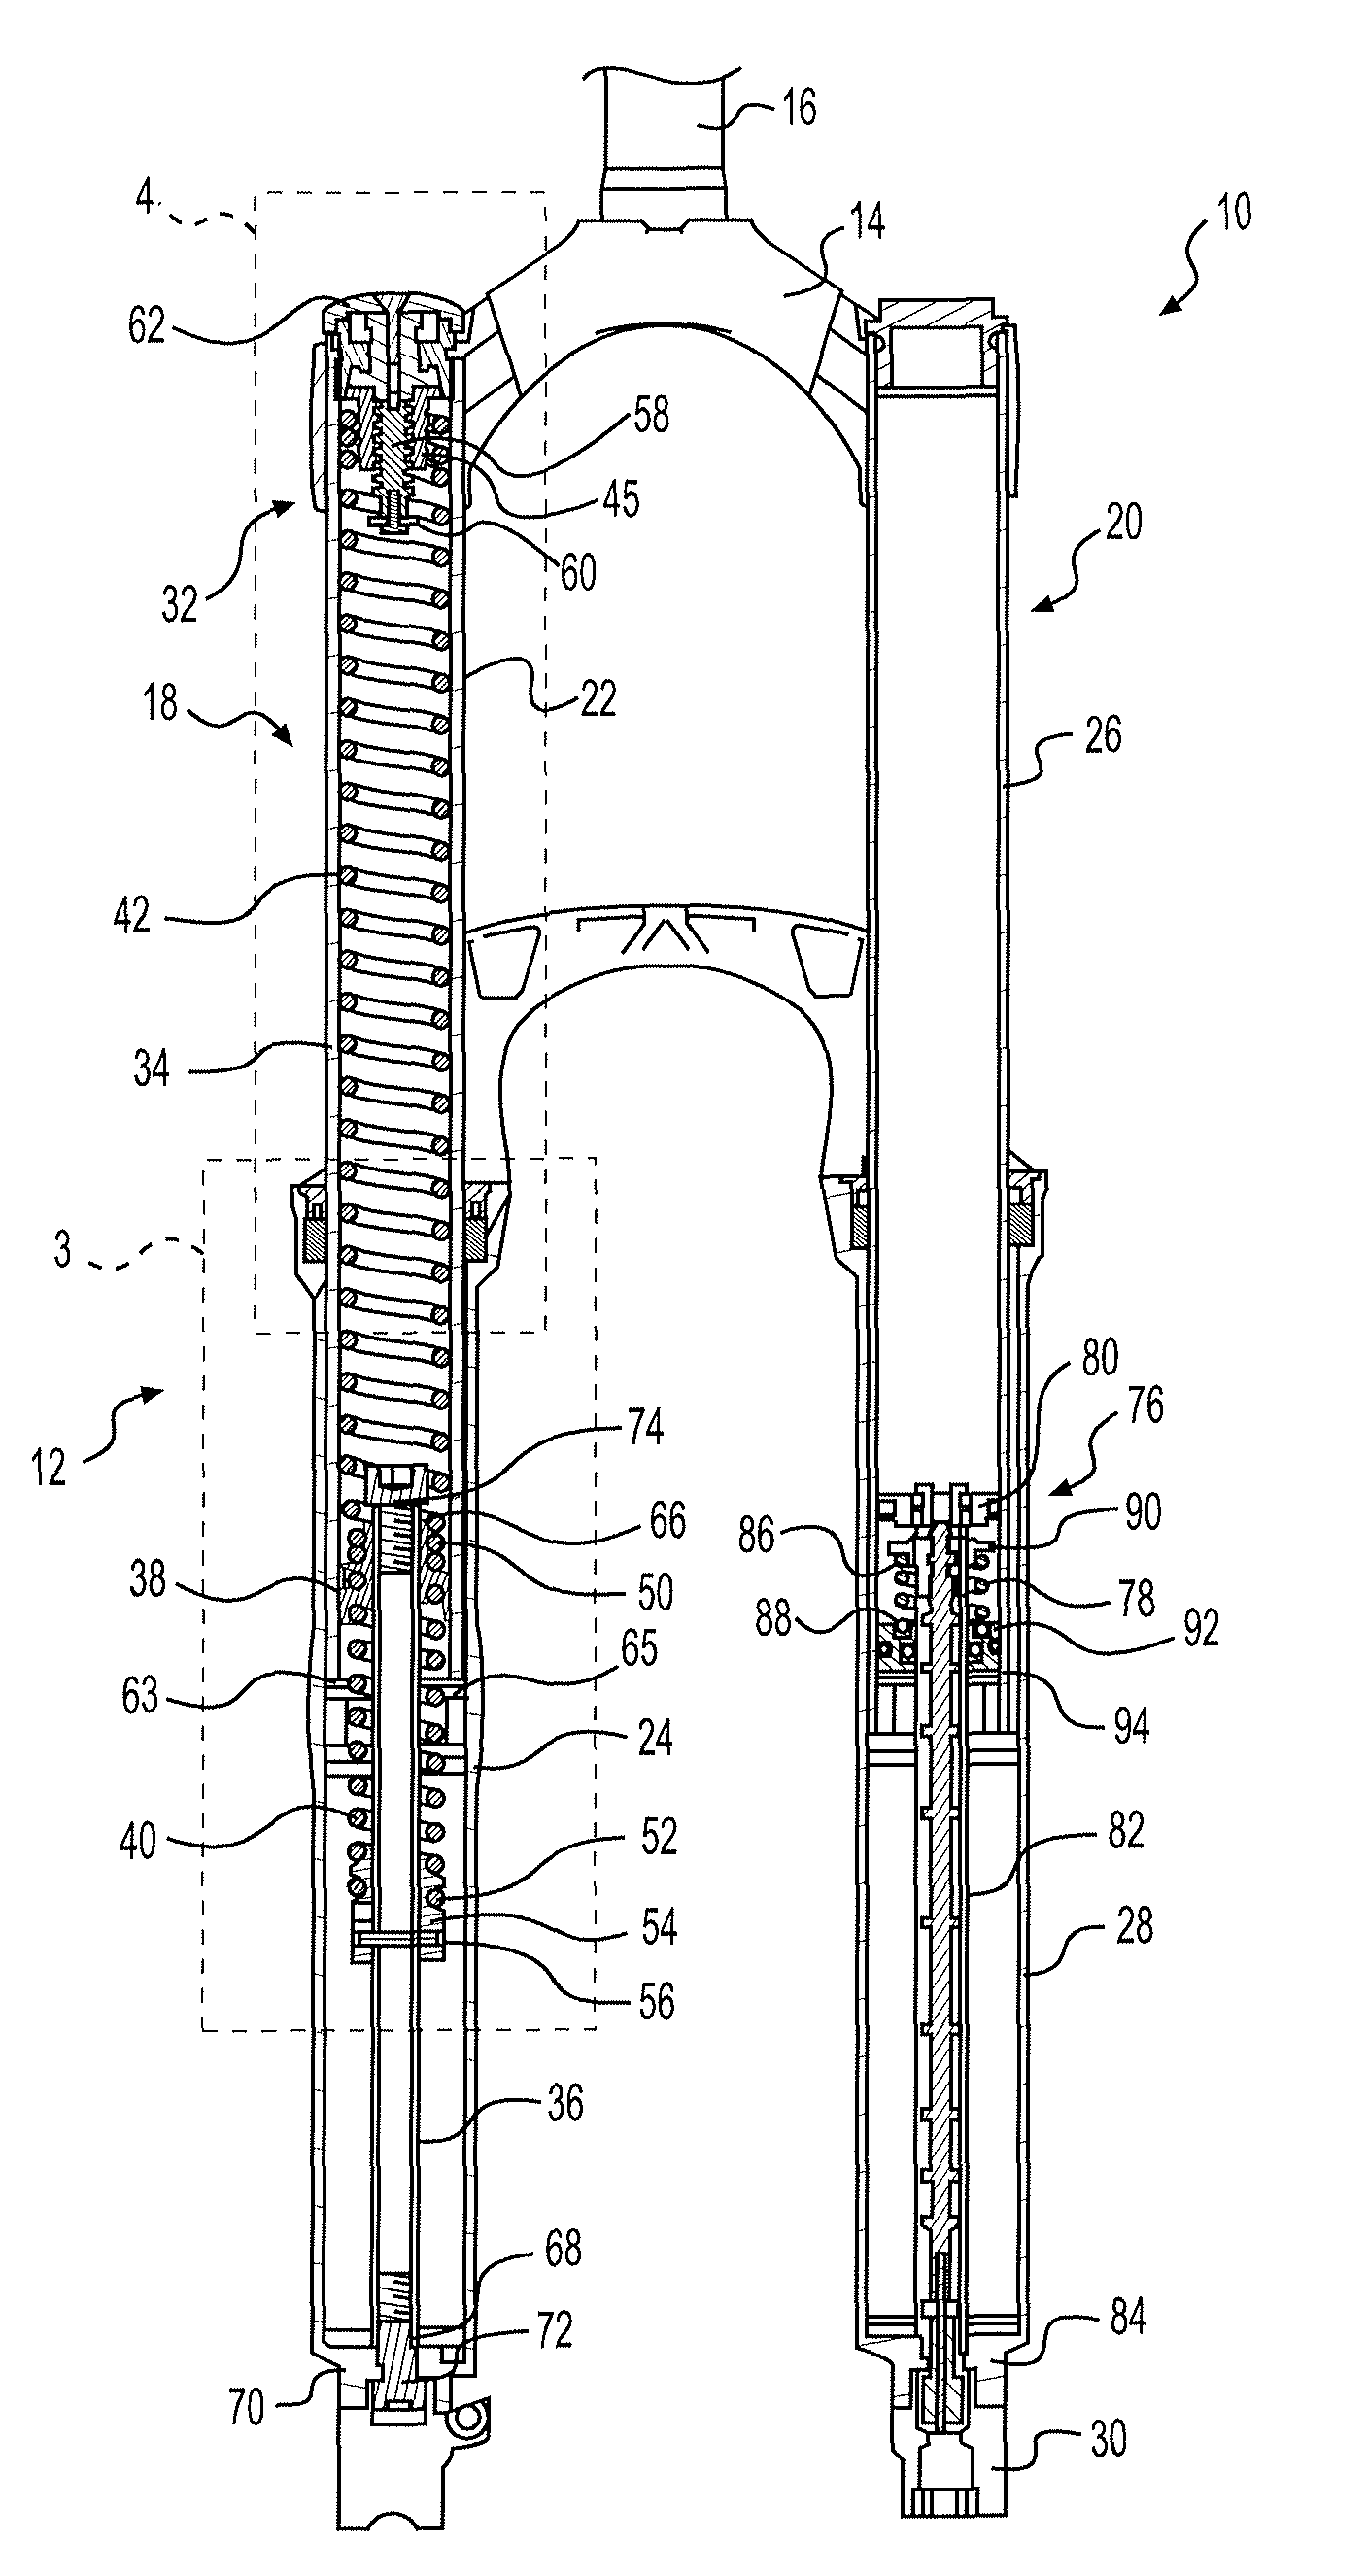 Spring suspension for a handlebar-steered vehicle